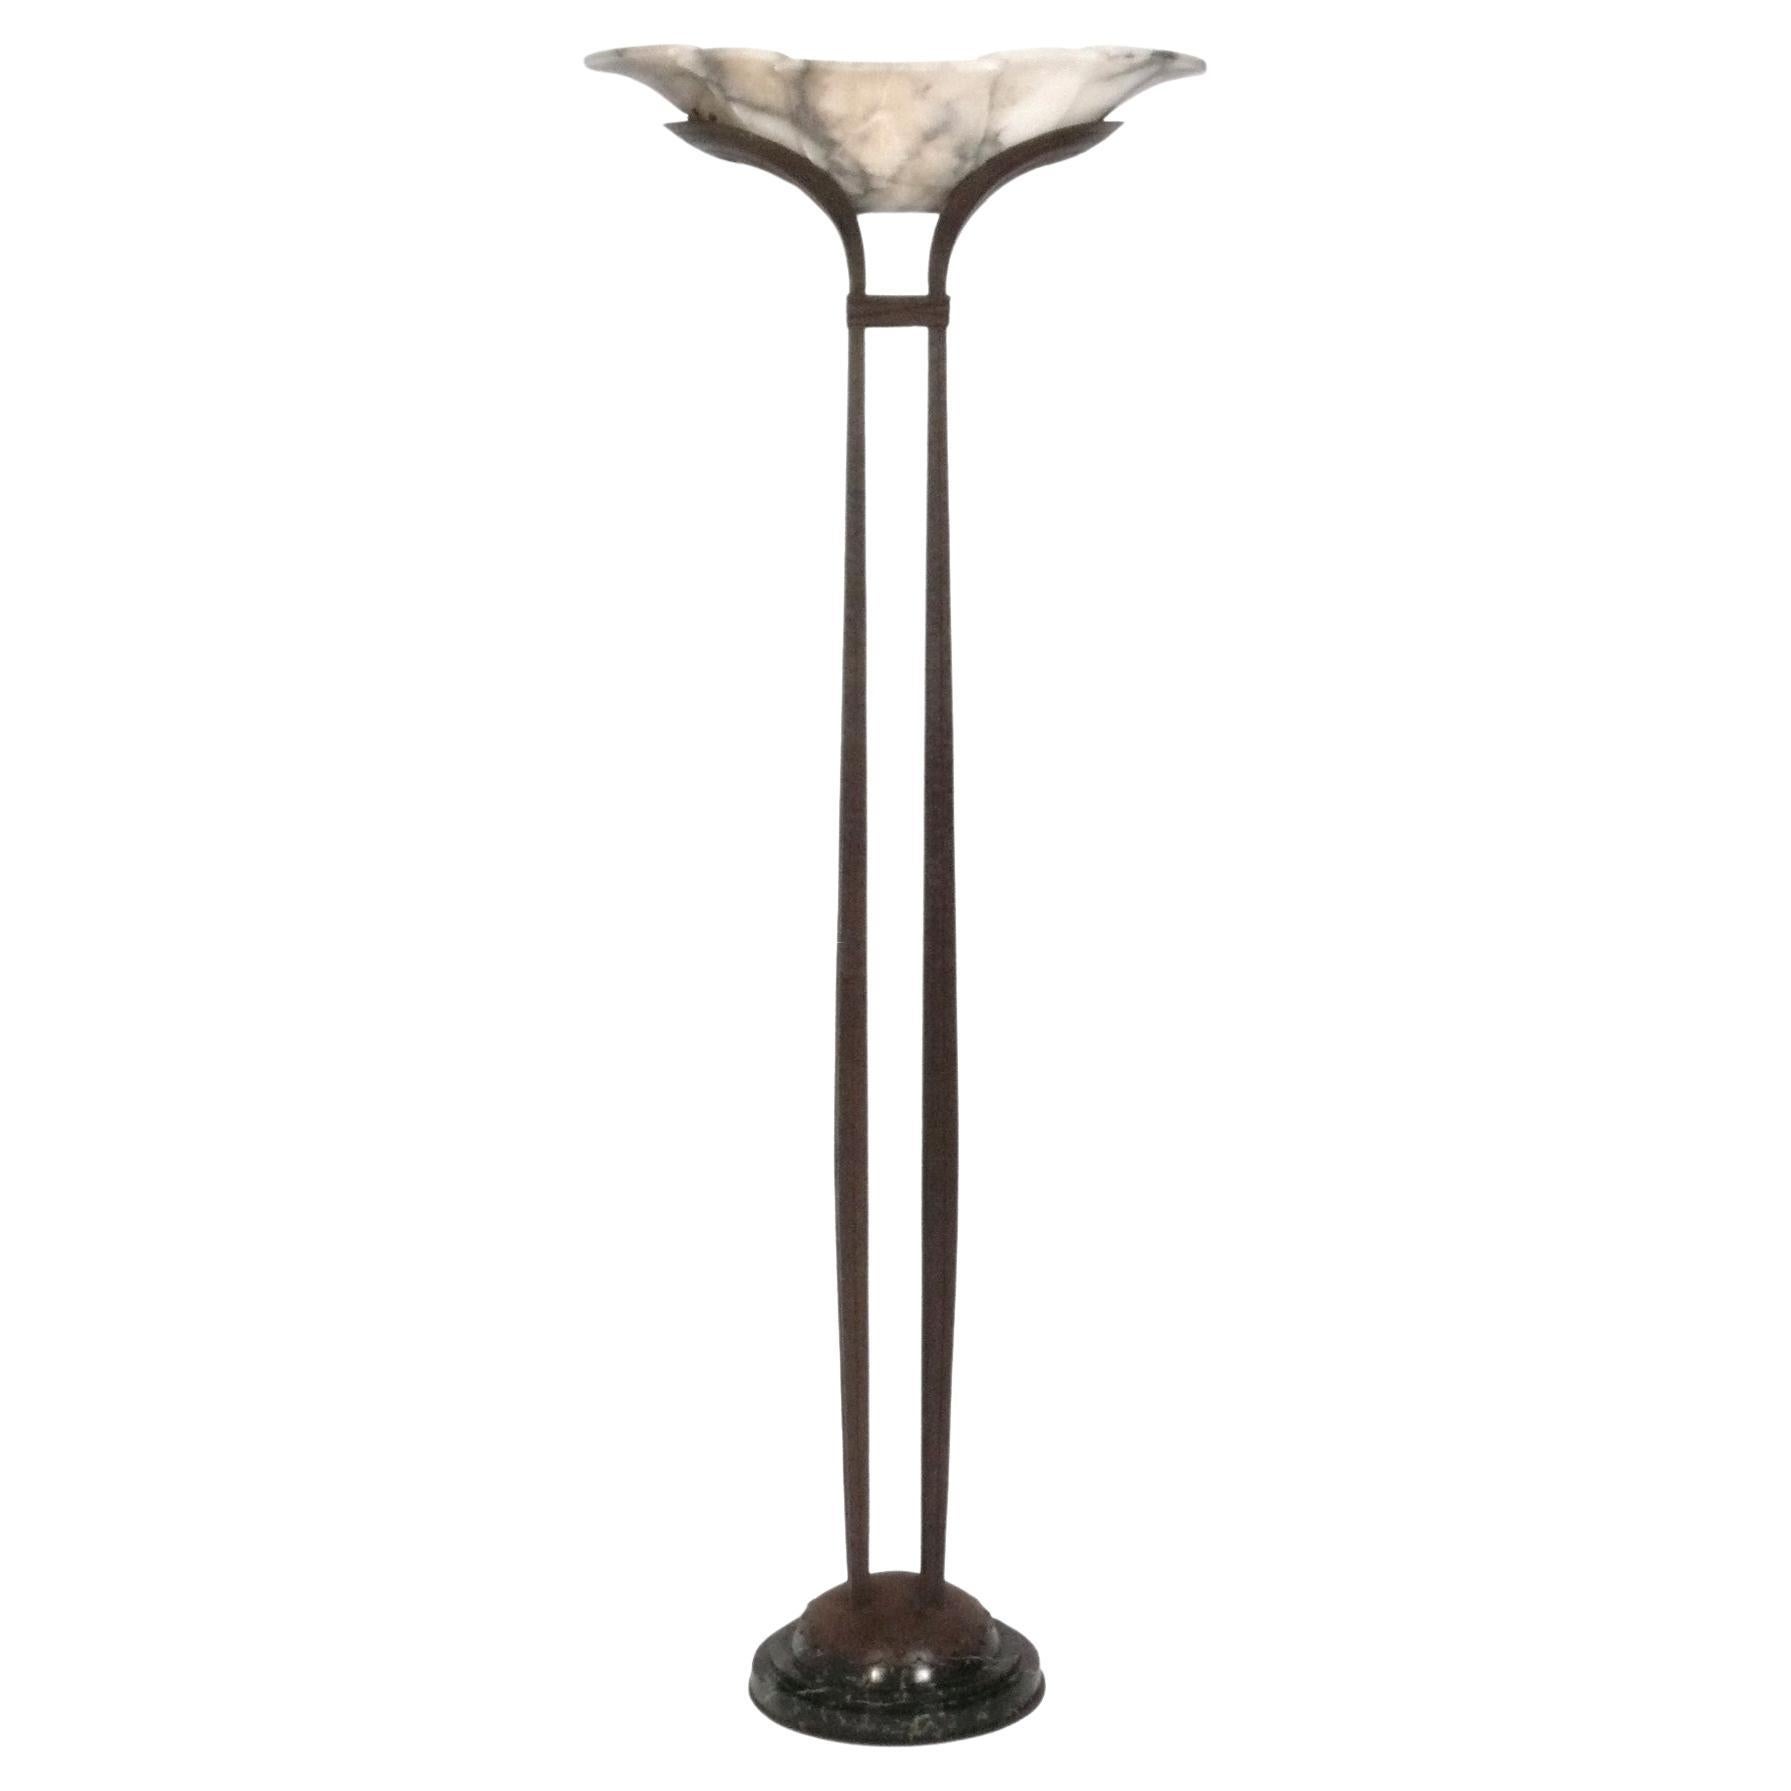 Art Deco Style Marble and Iron Floor Lamp